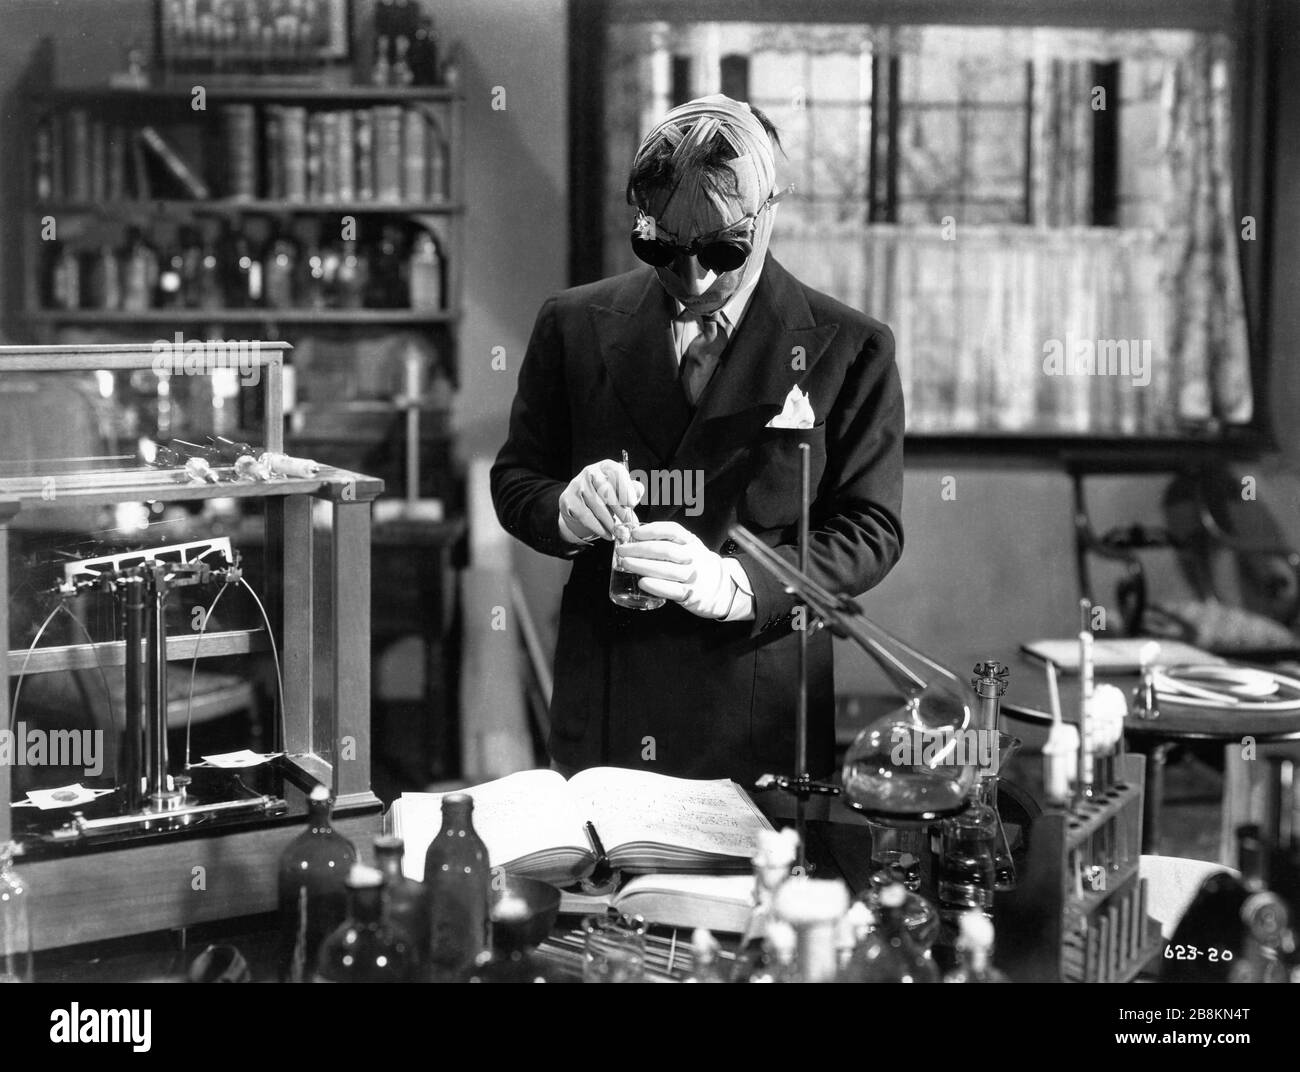 CLAUDE RAINS as Dr. Jack Griffin aka THE INVISIBLE MAN 1933 director JAMES WHALE novel H. G. Wells screenplay R. C. Sherriff Universal Pictures Stock Photo